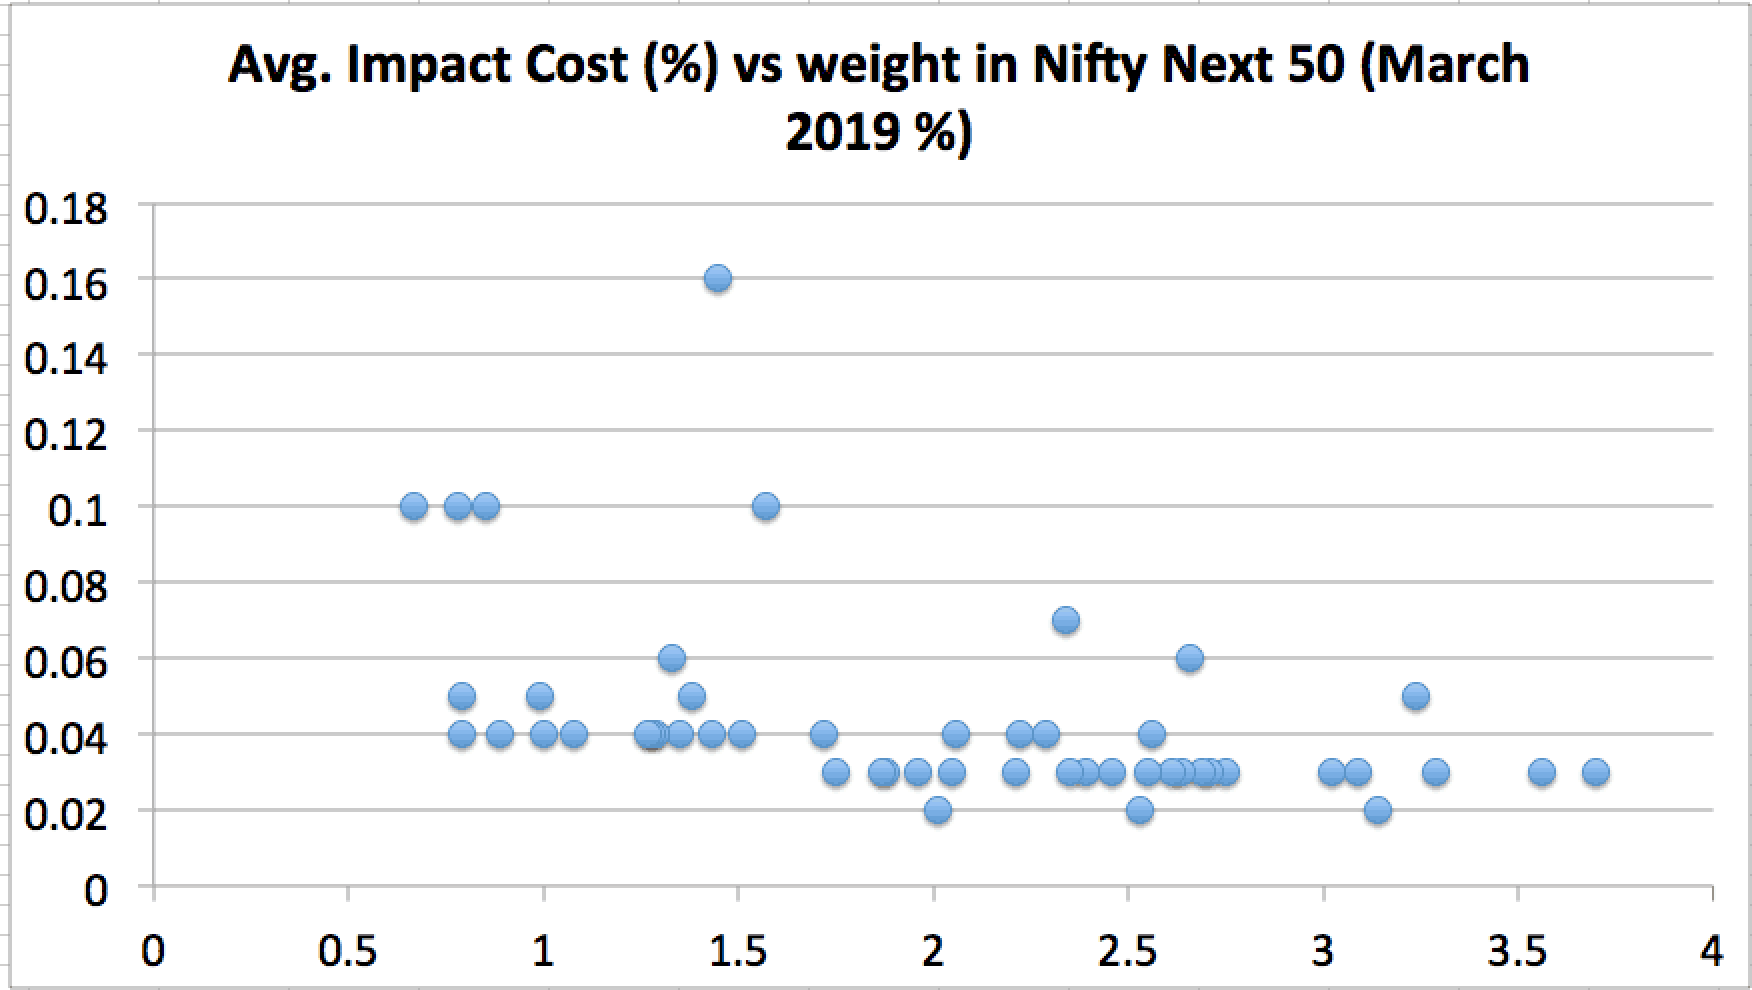 Impact cost of Nifty Next 50 stocks (March 2019) vs weightage